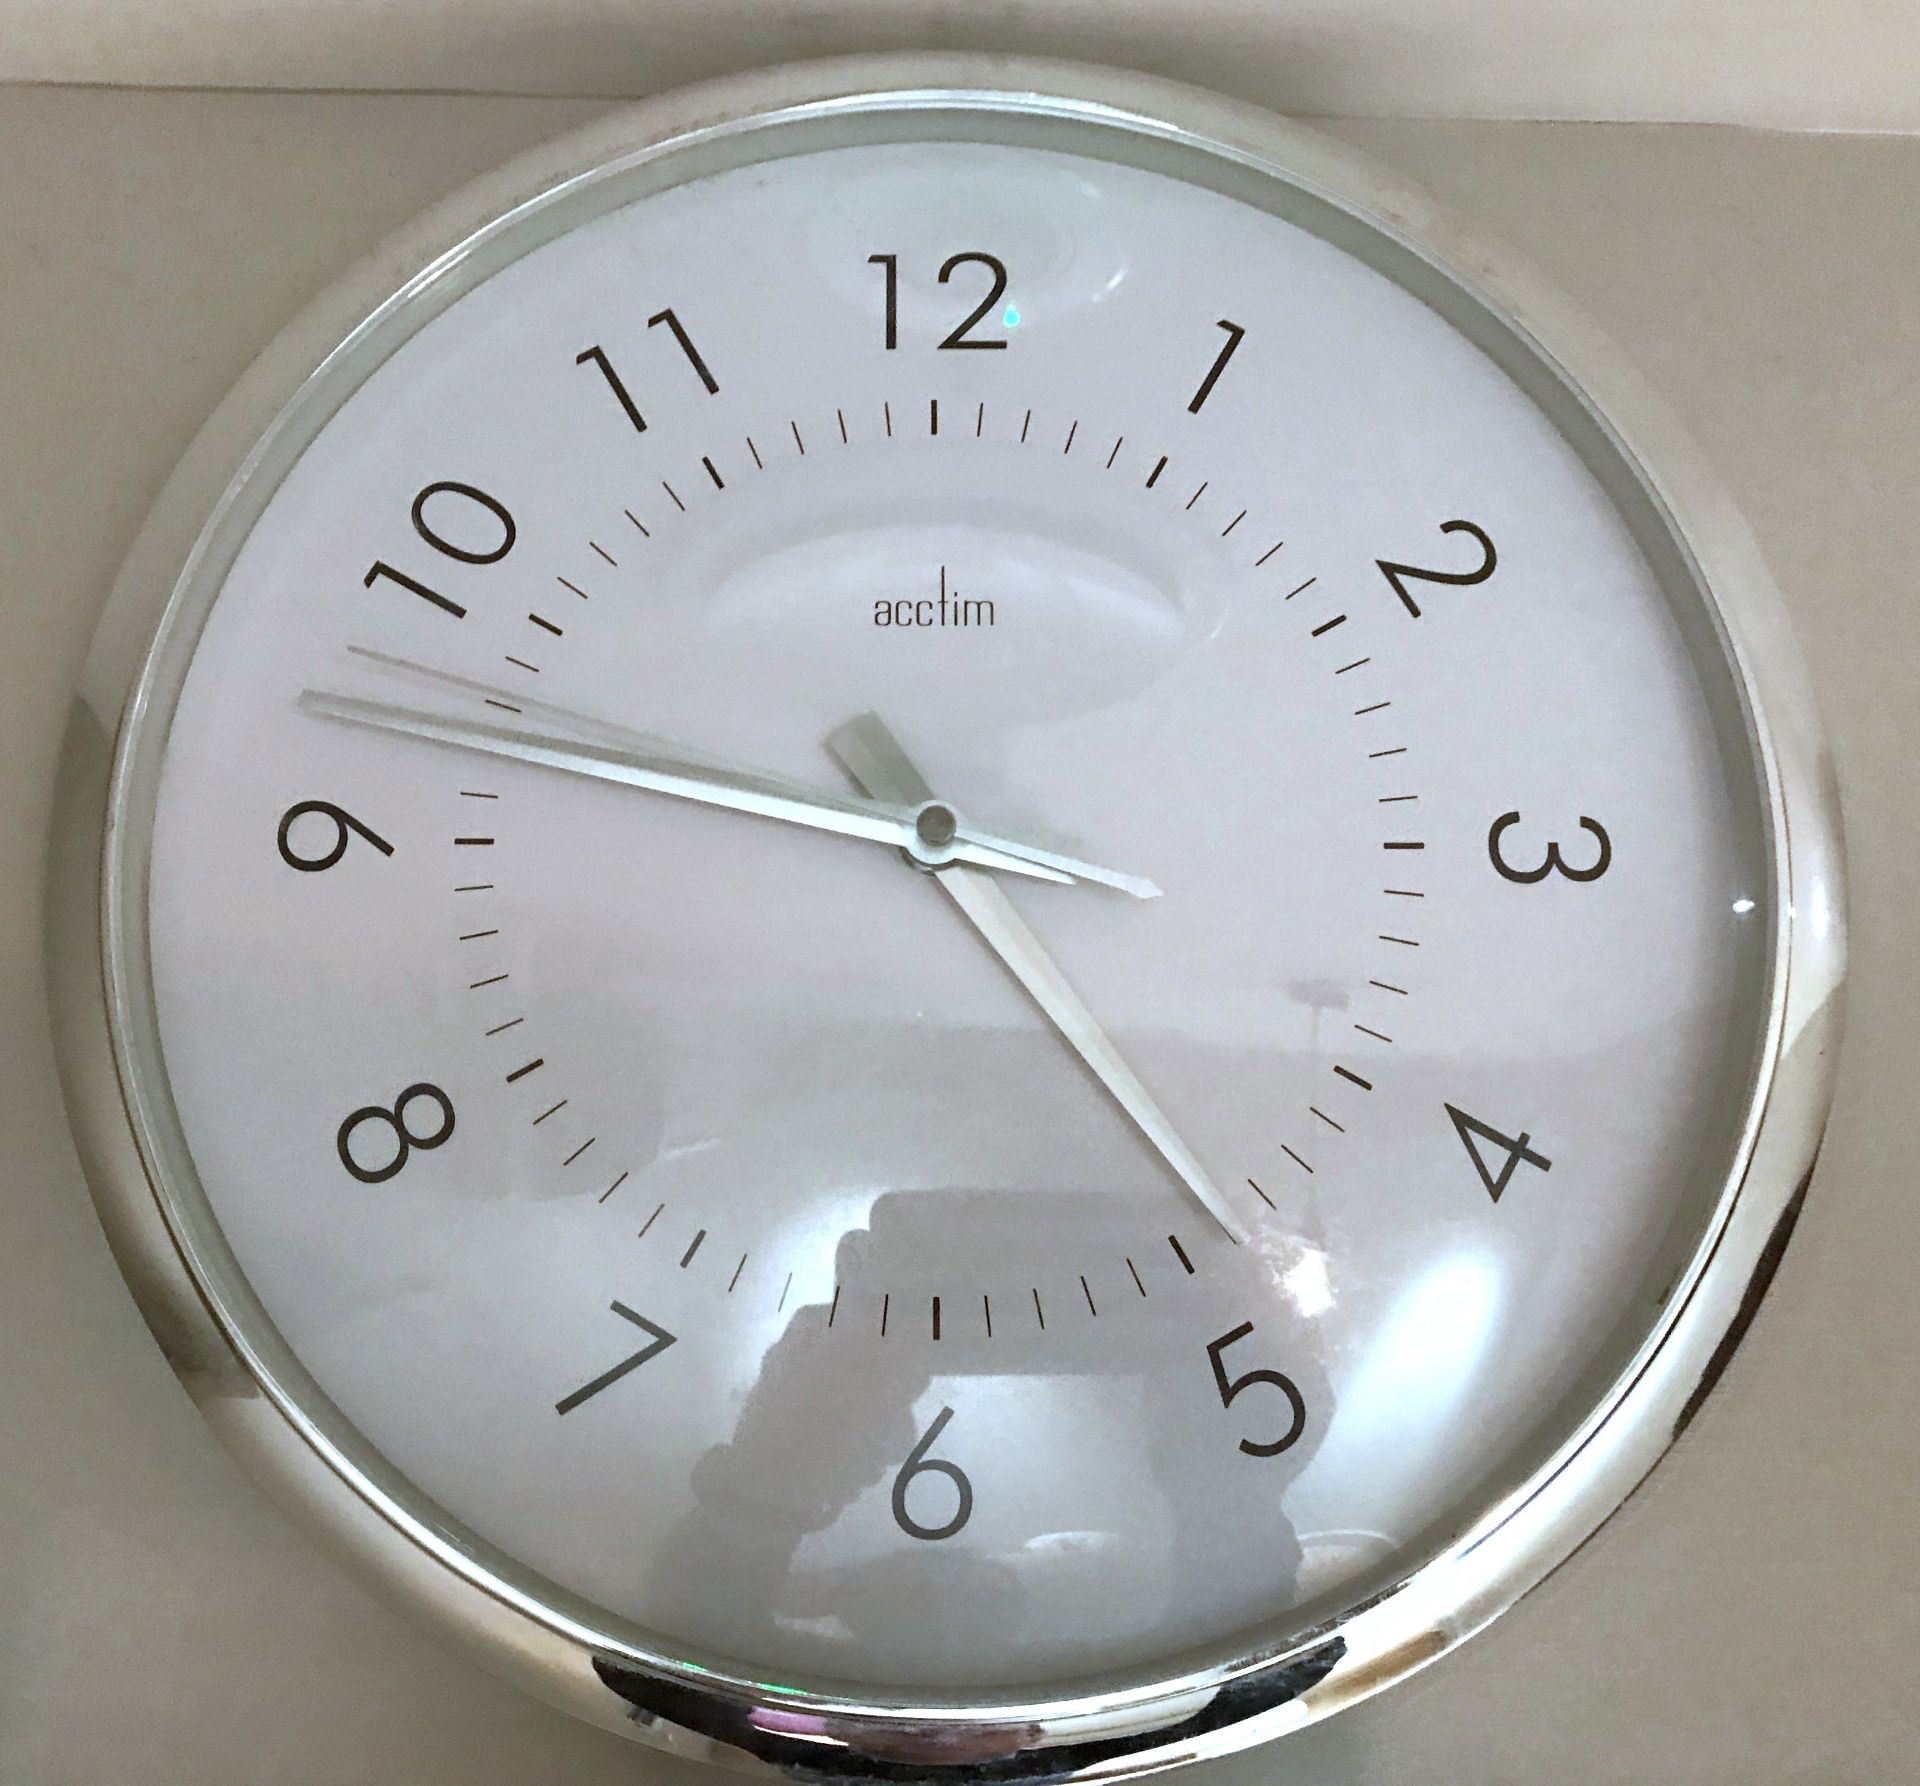 7 x Assorted Wall Clocks With Chrome Finish - Brands Include Quartz and Acctim - CL587 - Location: - Image 3 of 3